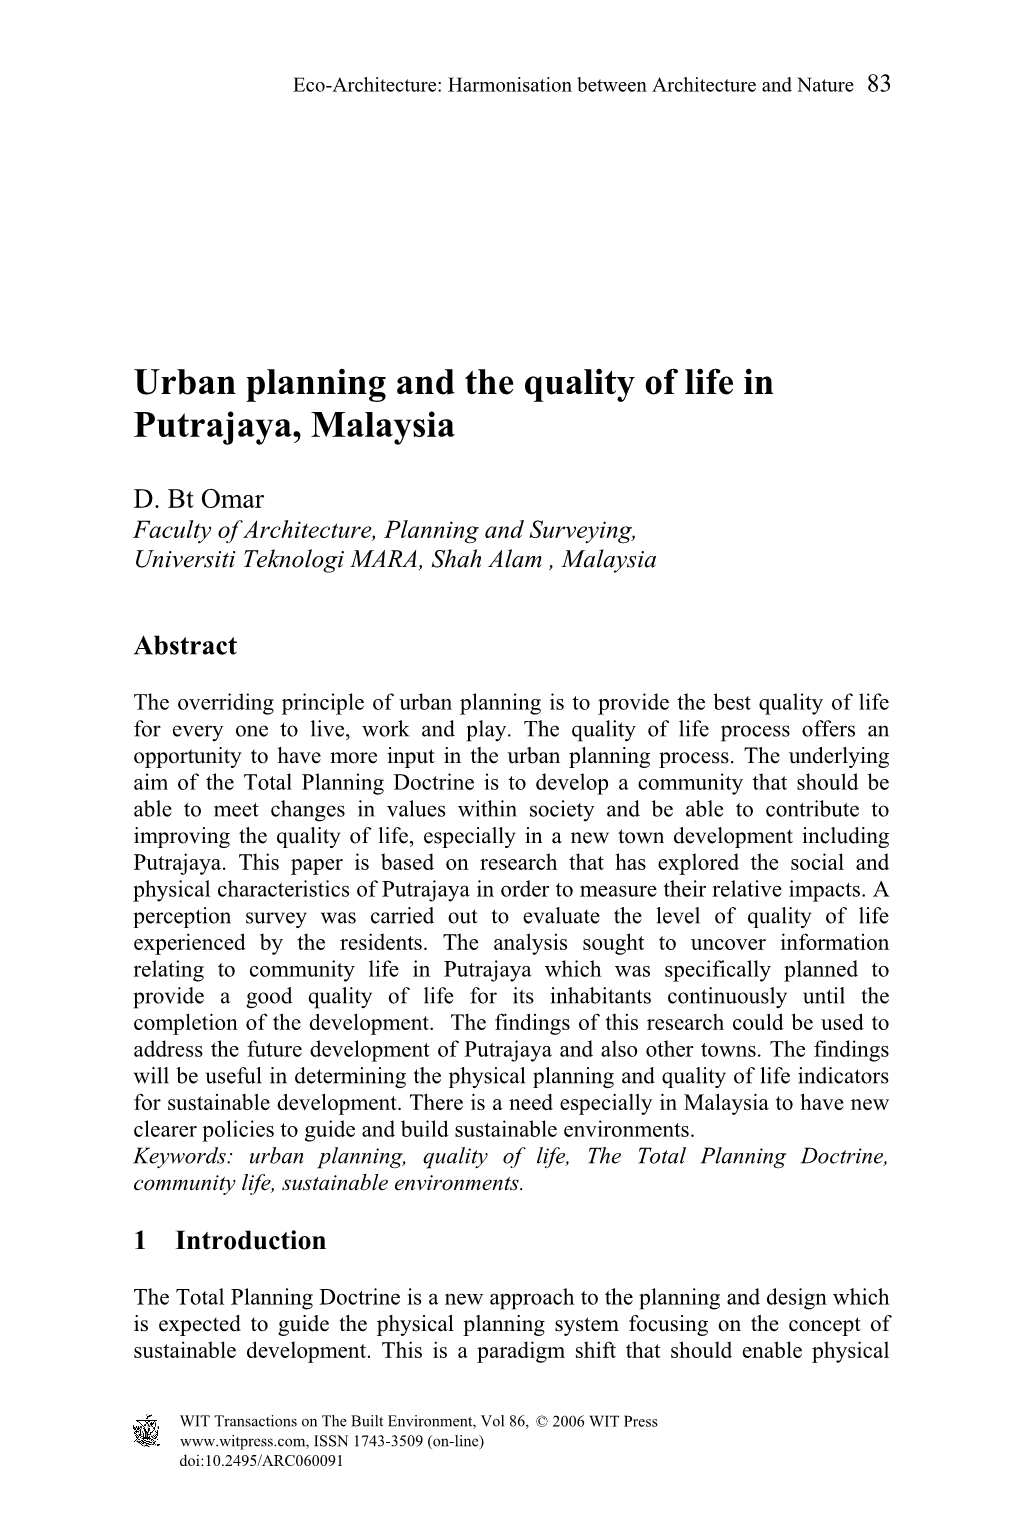 Urban Planning and the Quality of Life in Putrajaya, Malaysia